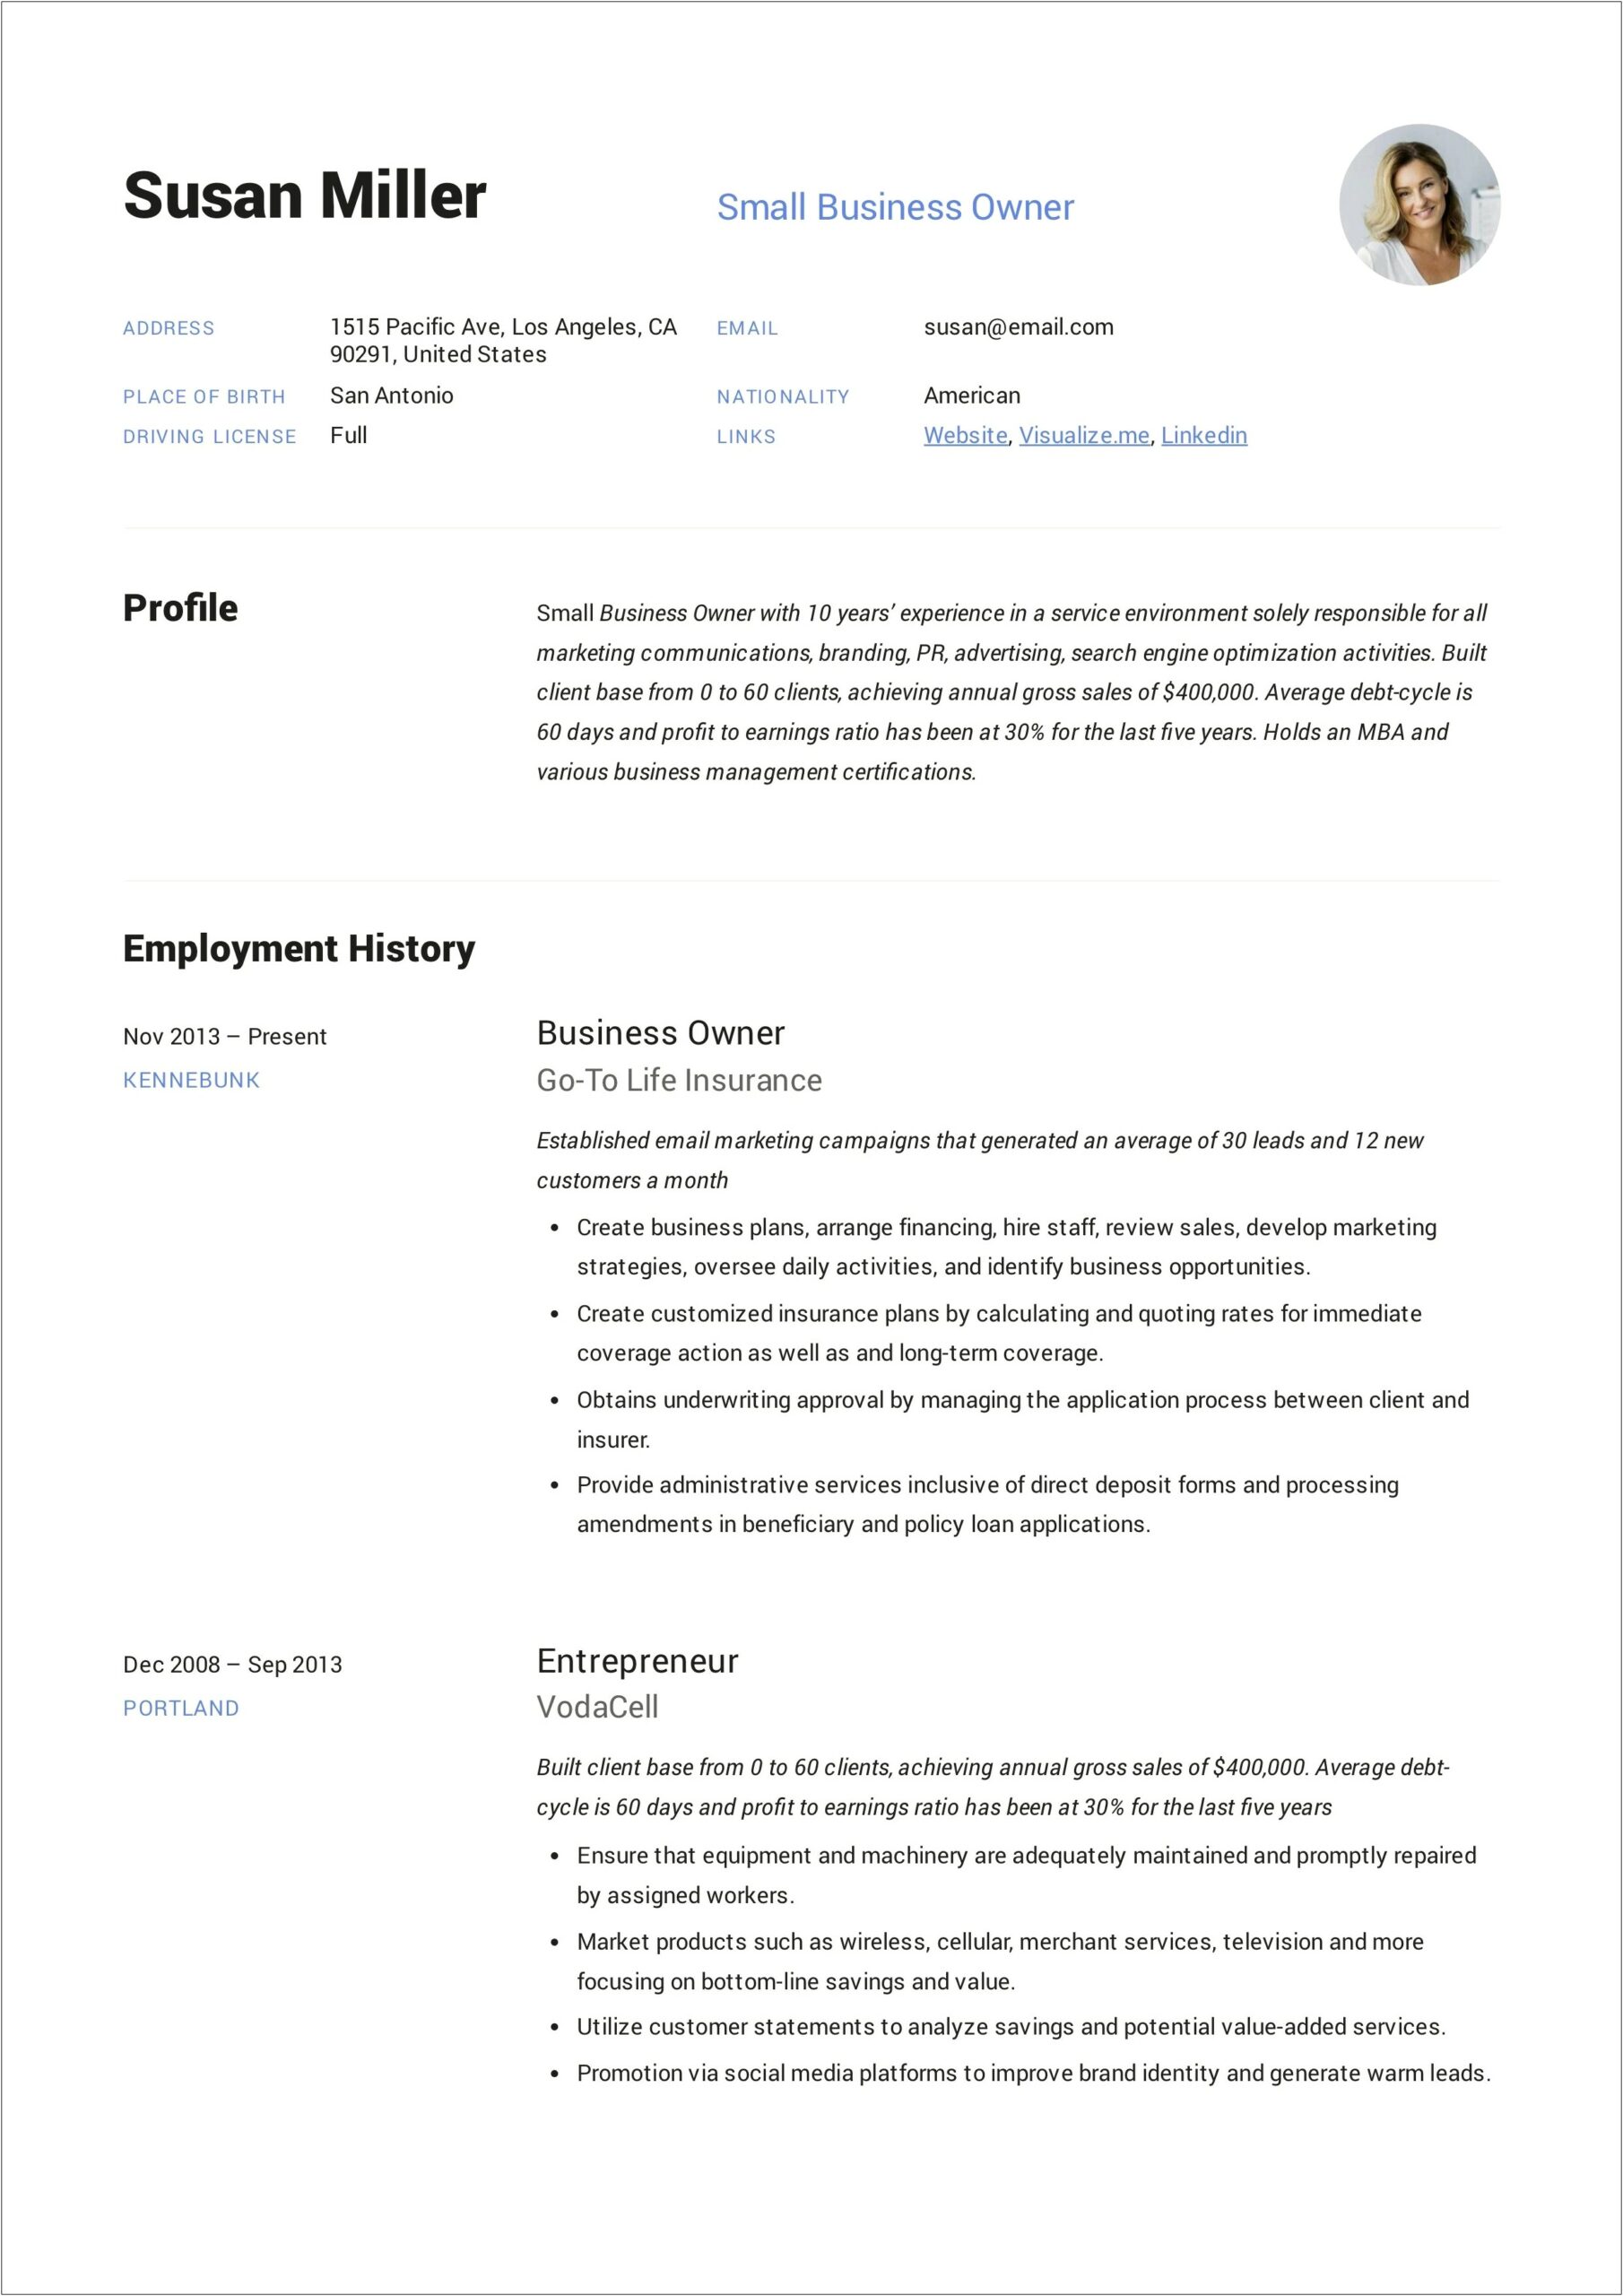 Self Employed Compamy Owner Resume Example